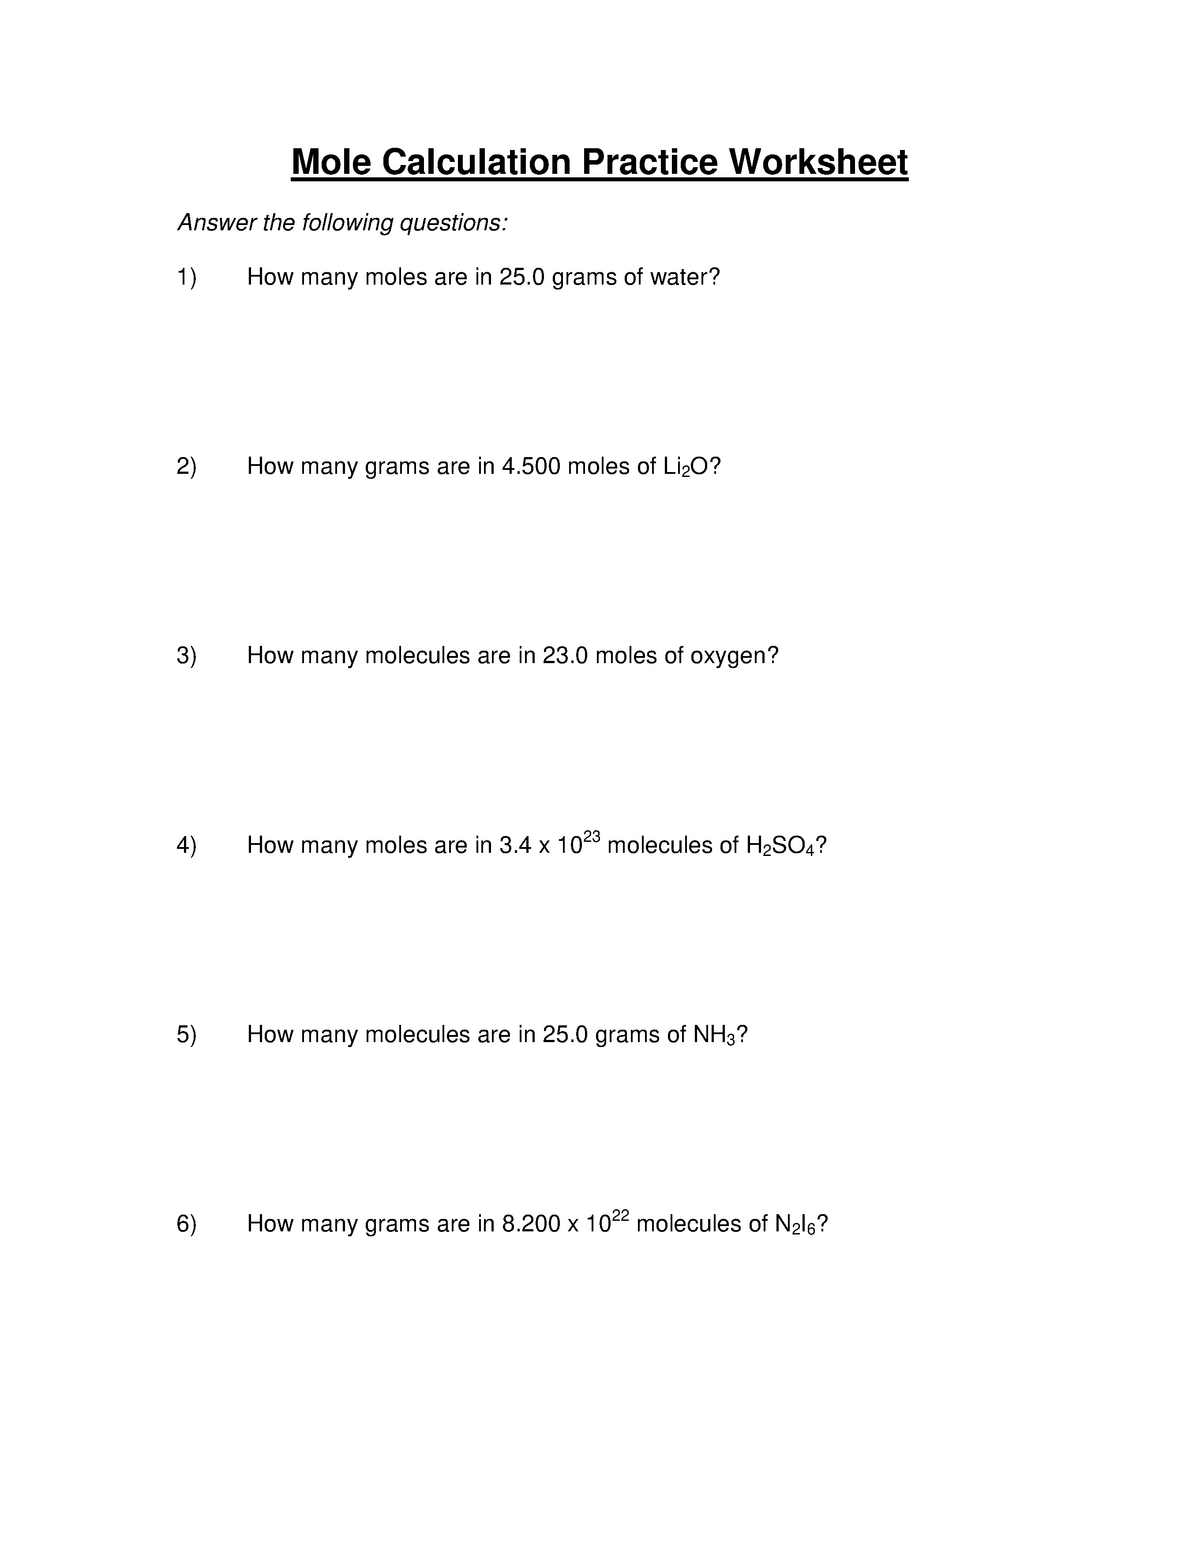 Chemistry for Engineers - Mole Worksheet and Solns 22 - Mole Throughout Mole Worksheet 1